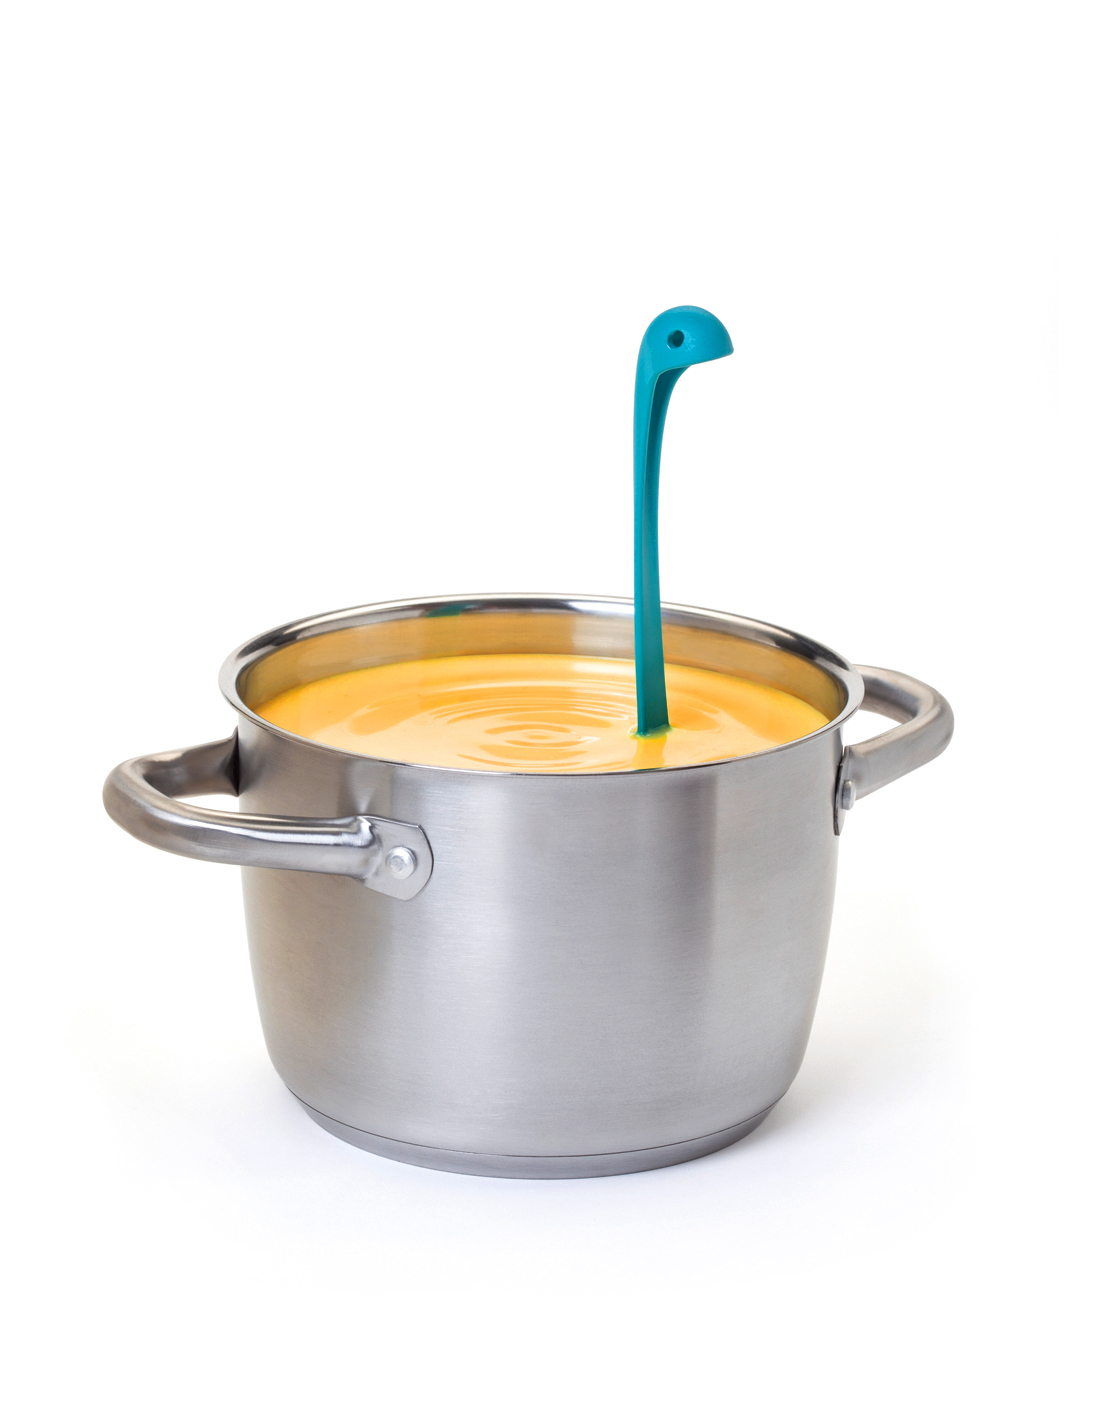 ladle loch ness monster Soup cookware kitchen Fun